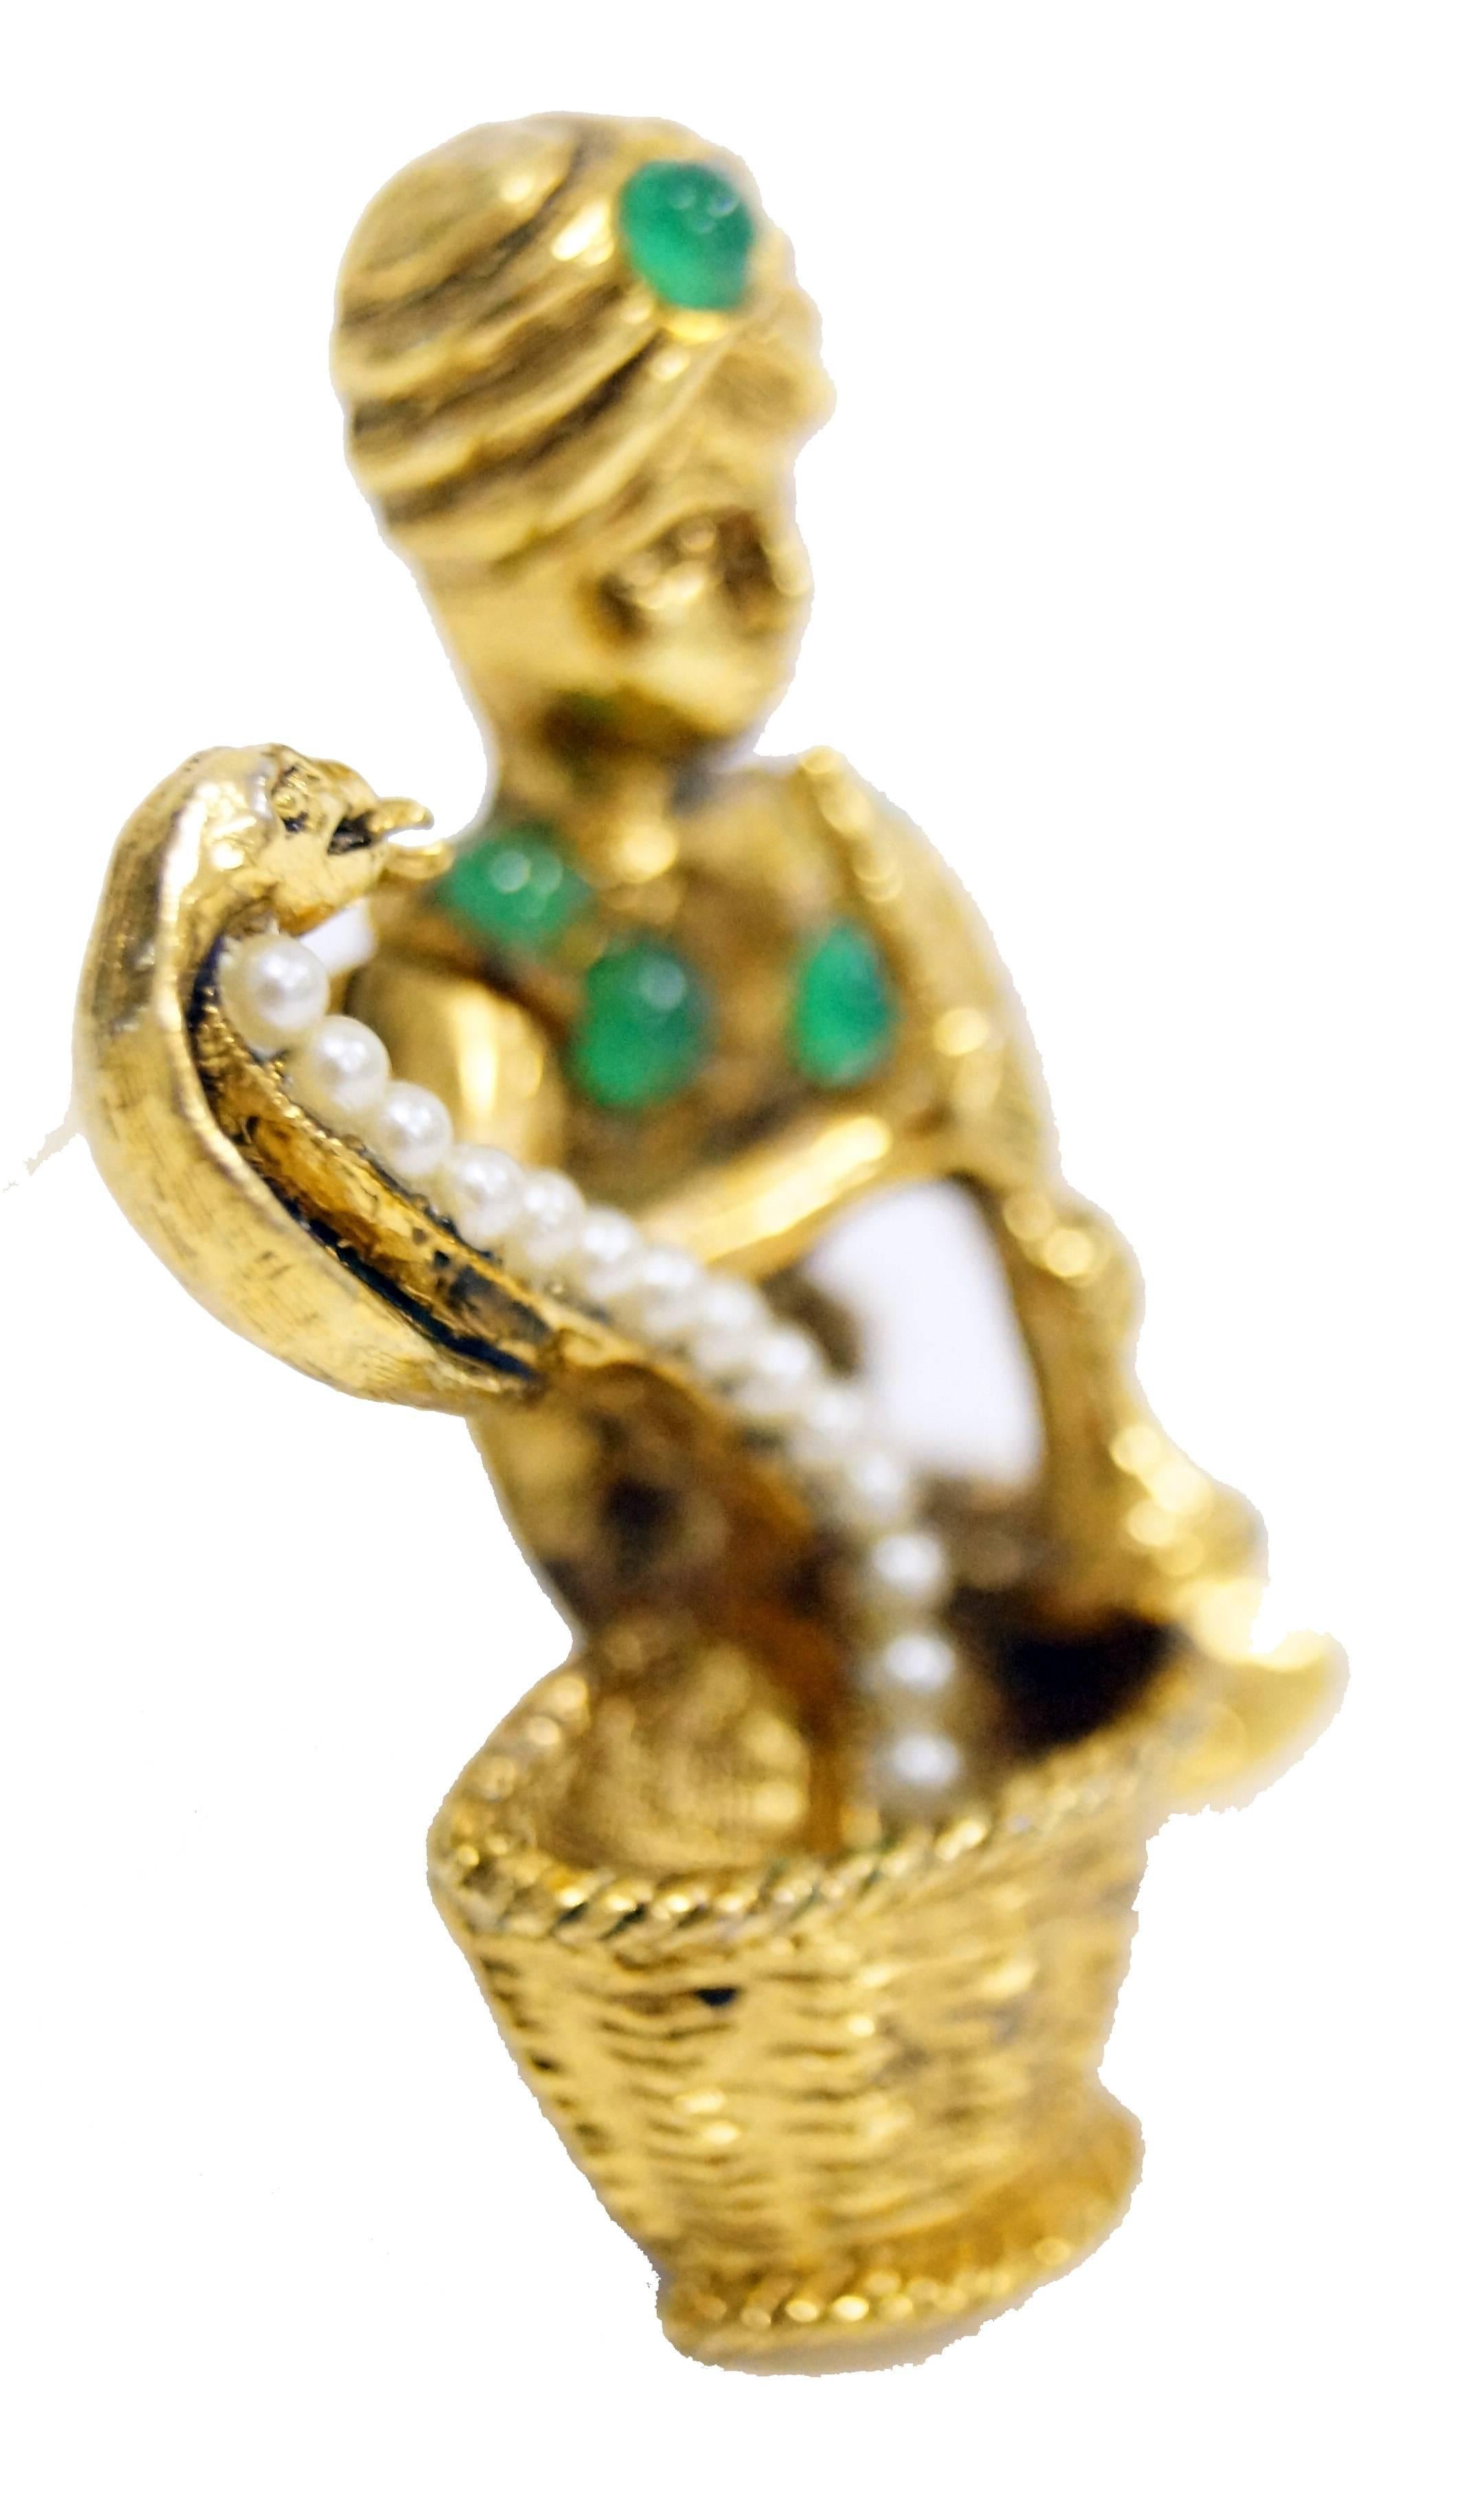 1960s Hattie Carnegie Snake Charmer Brooch

We are absolutely charmed by this mid century figural brooch by Hattie Carnegie. The gold tone brooch depicts a cross-legged snake charmer playing his pungi flute and coaxing a cobra out of a woven basket.